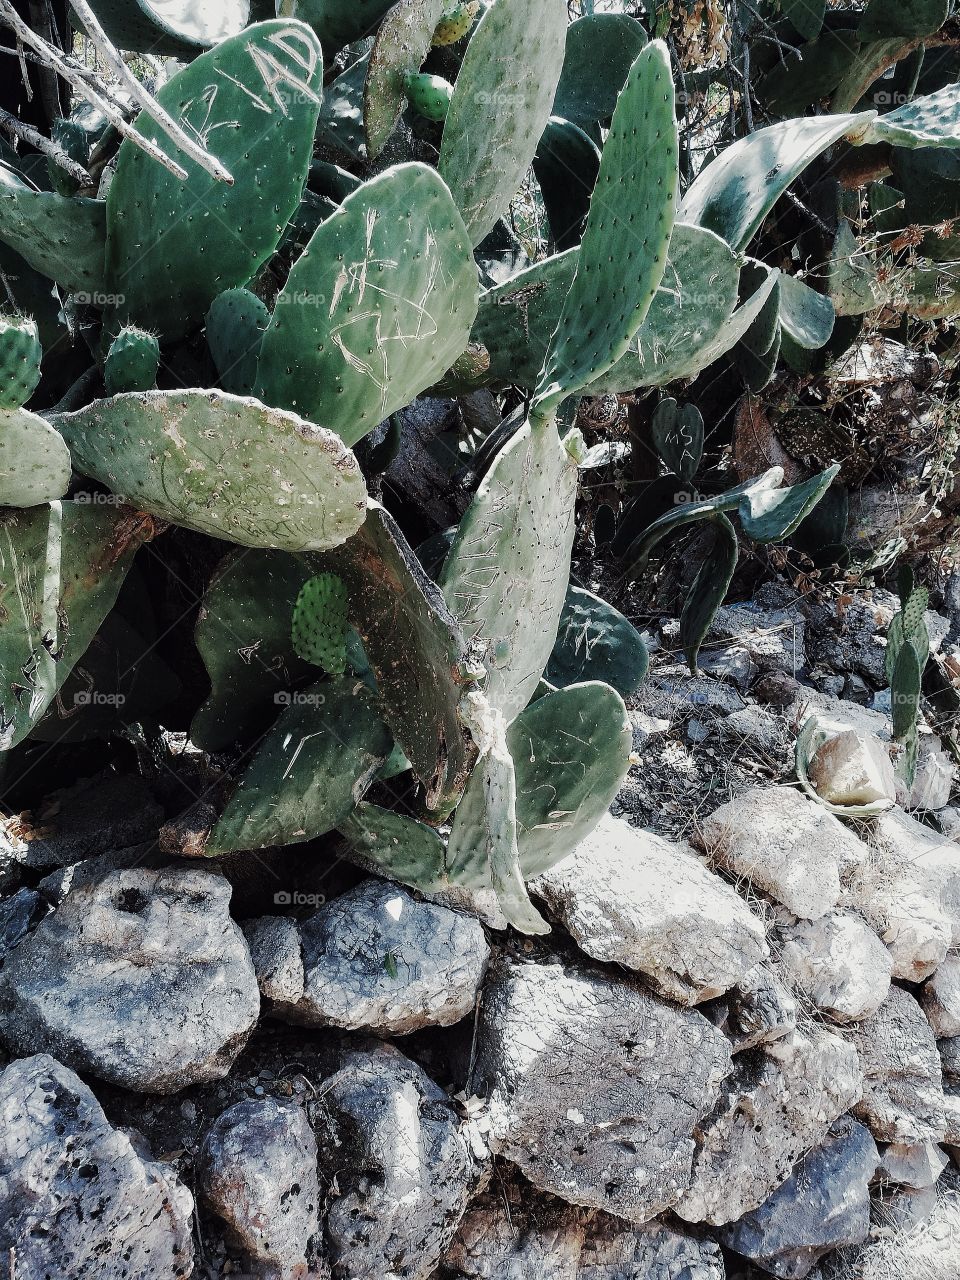 Day no people outdoors summer sunday green cactus stones travel sunlight shadow close-up